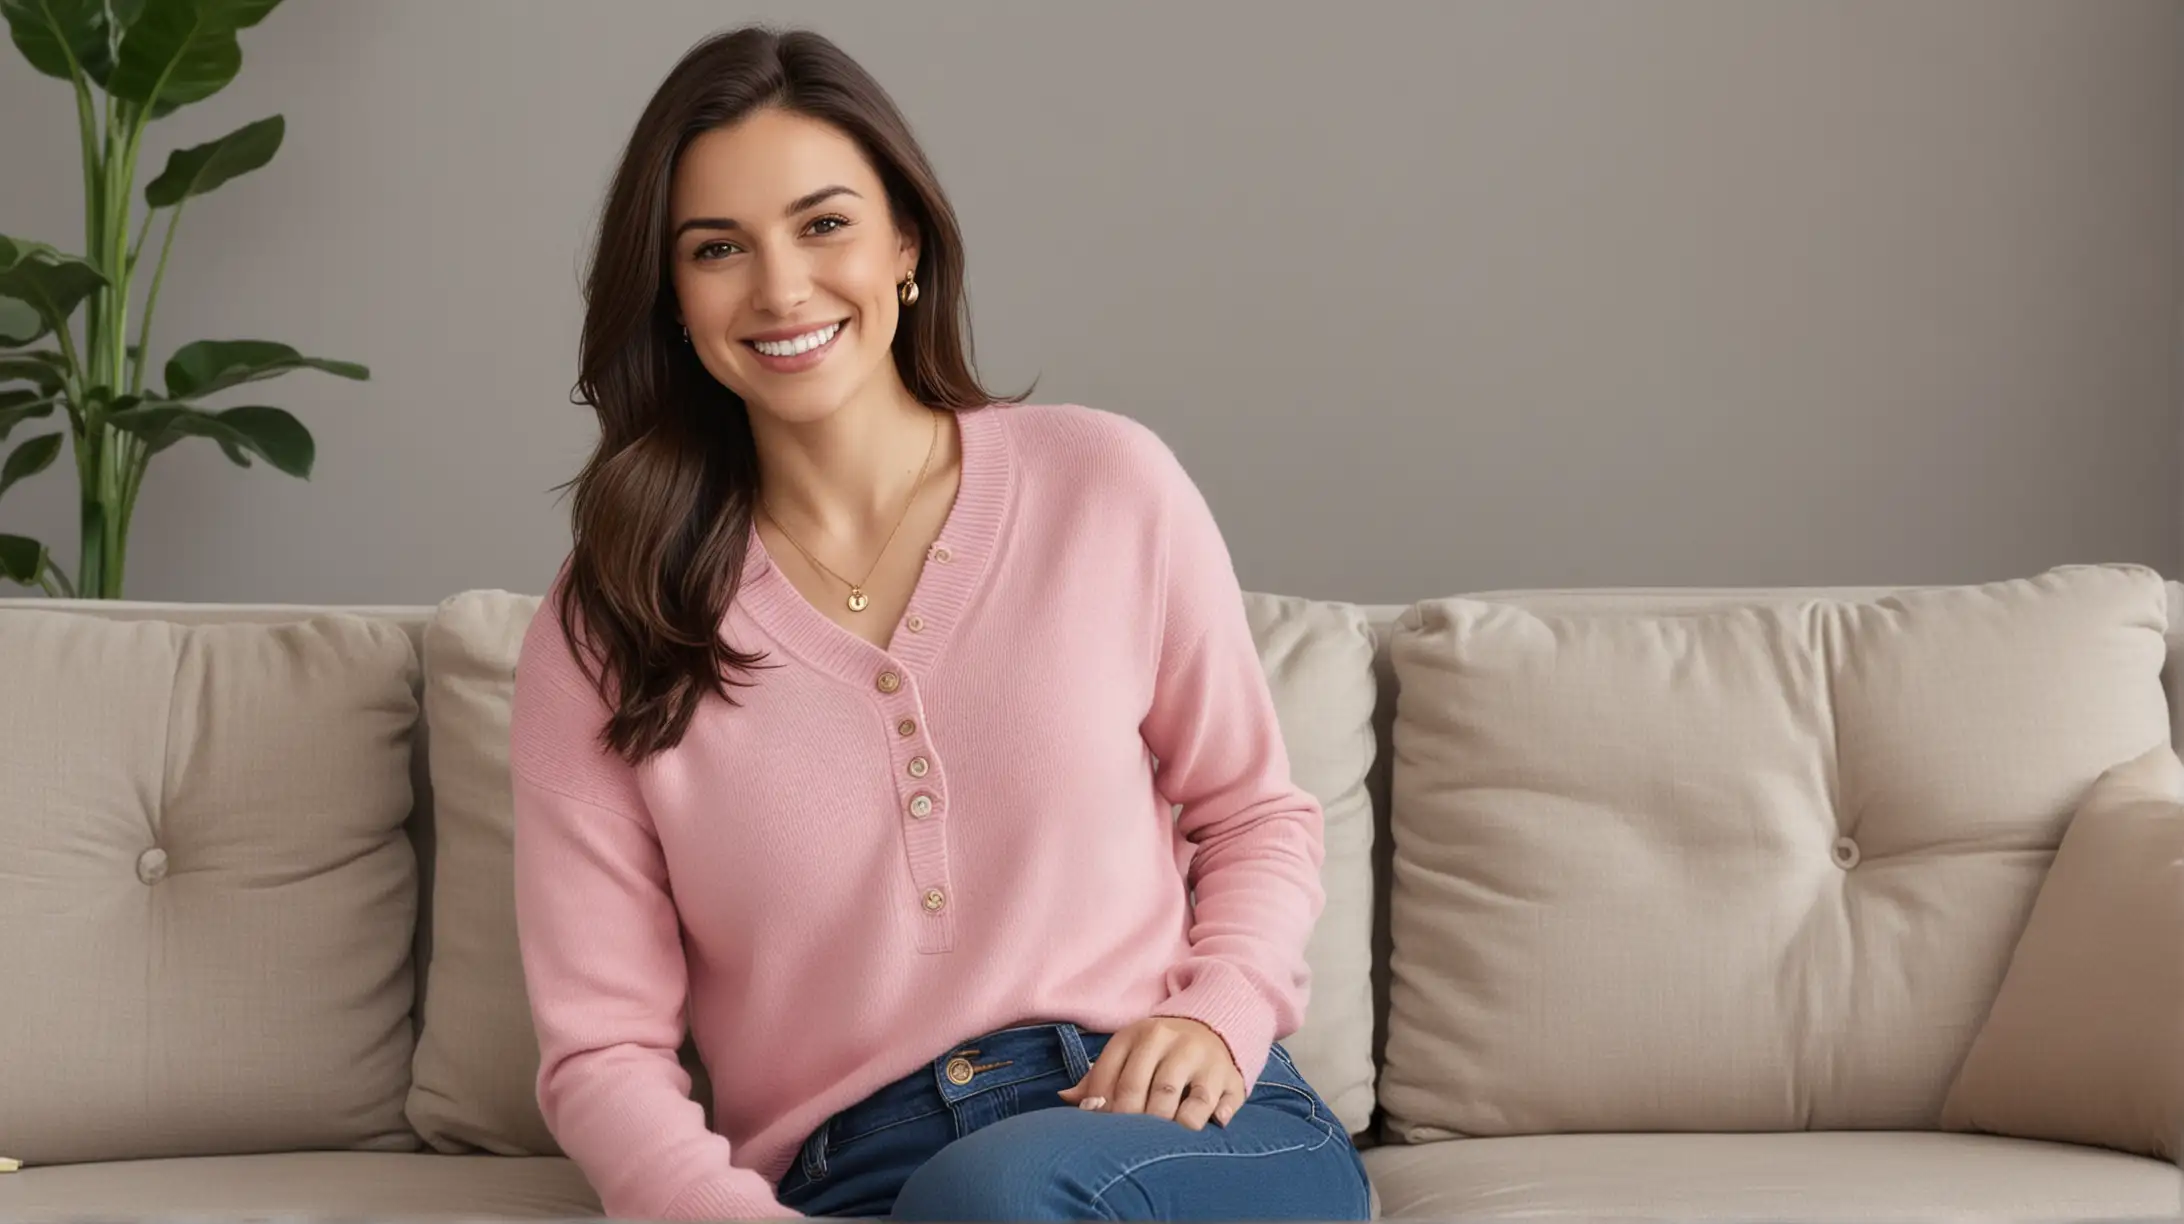 30 year old smiling white woman with long dark brown hair parted right wearing a simple gold necklace, pink button up sweater, blue jeans, sitting on a gray couch, modern apartment background